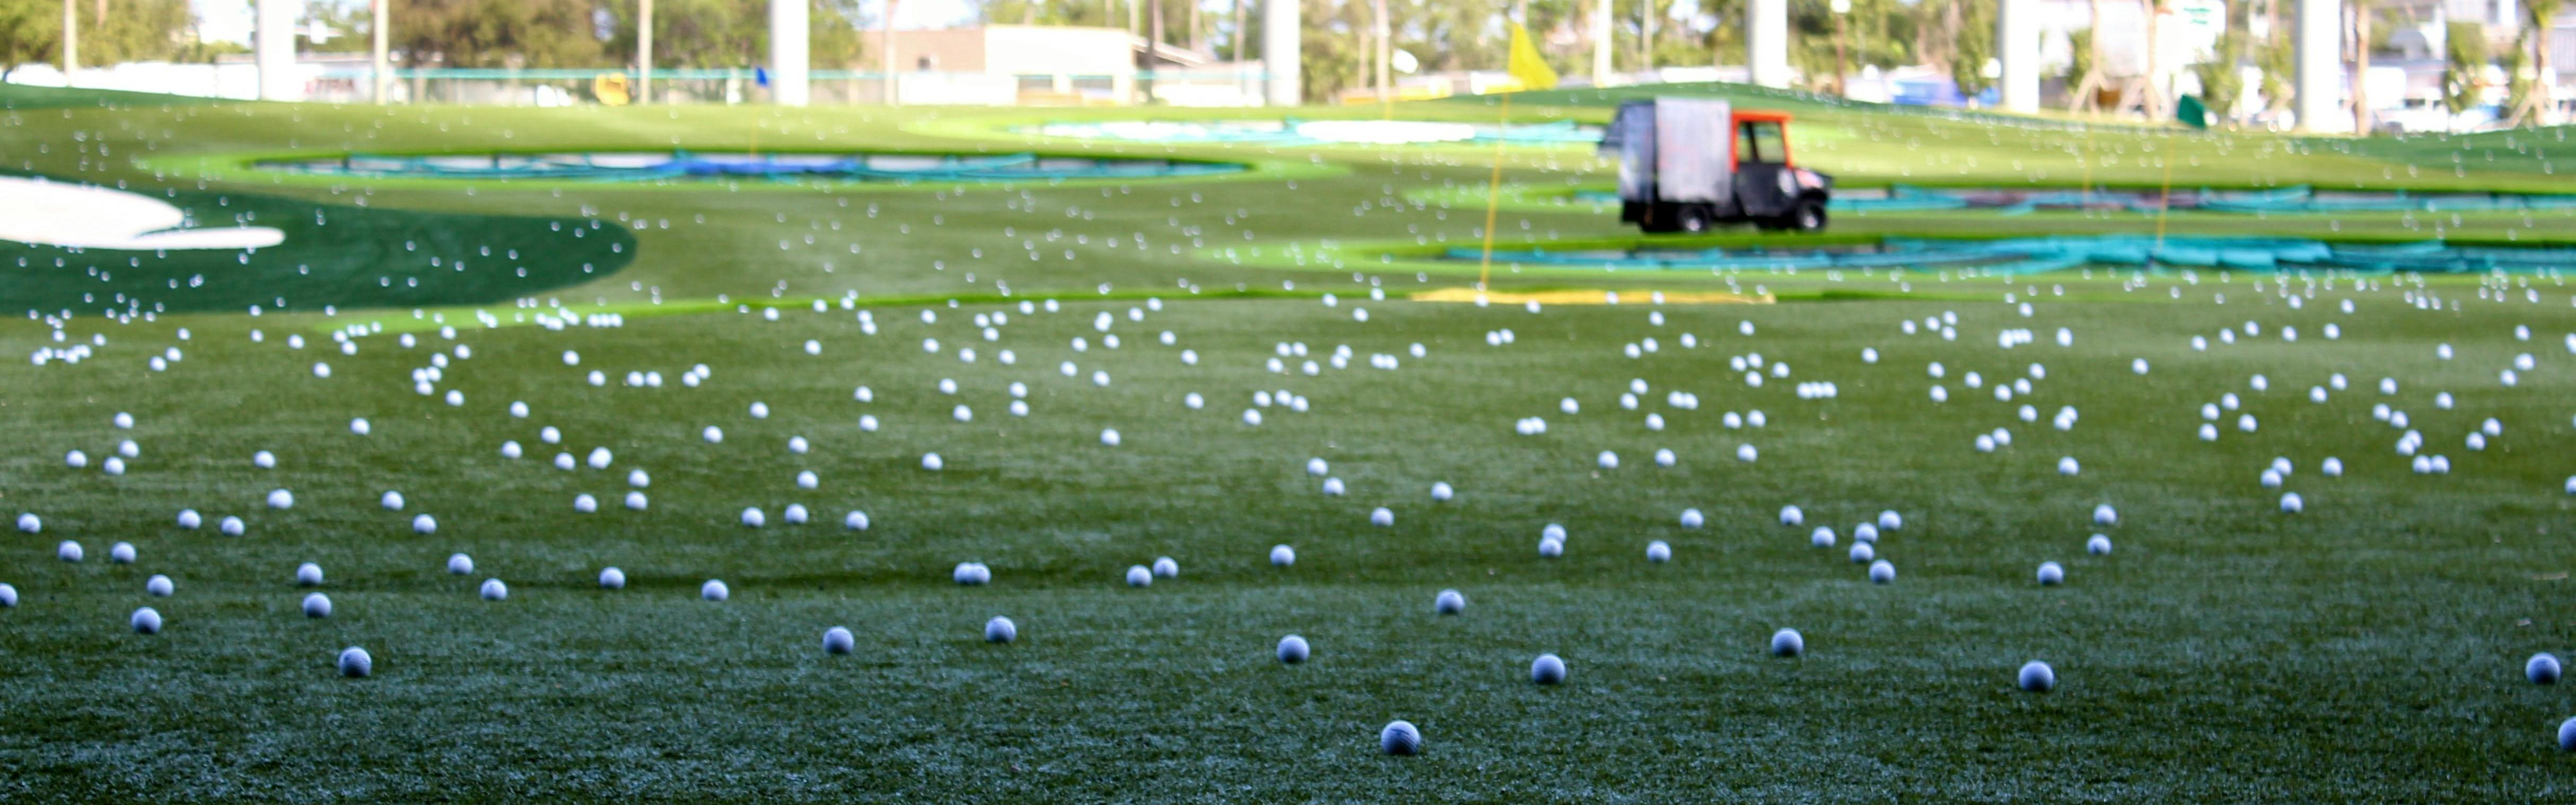 A bunch of golf balls on a driving range.